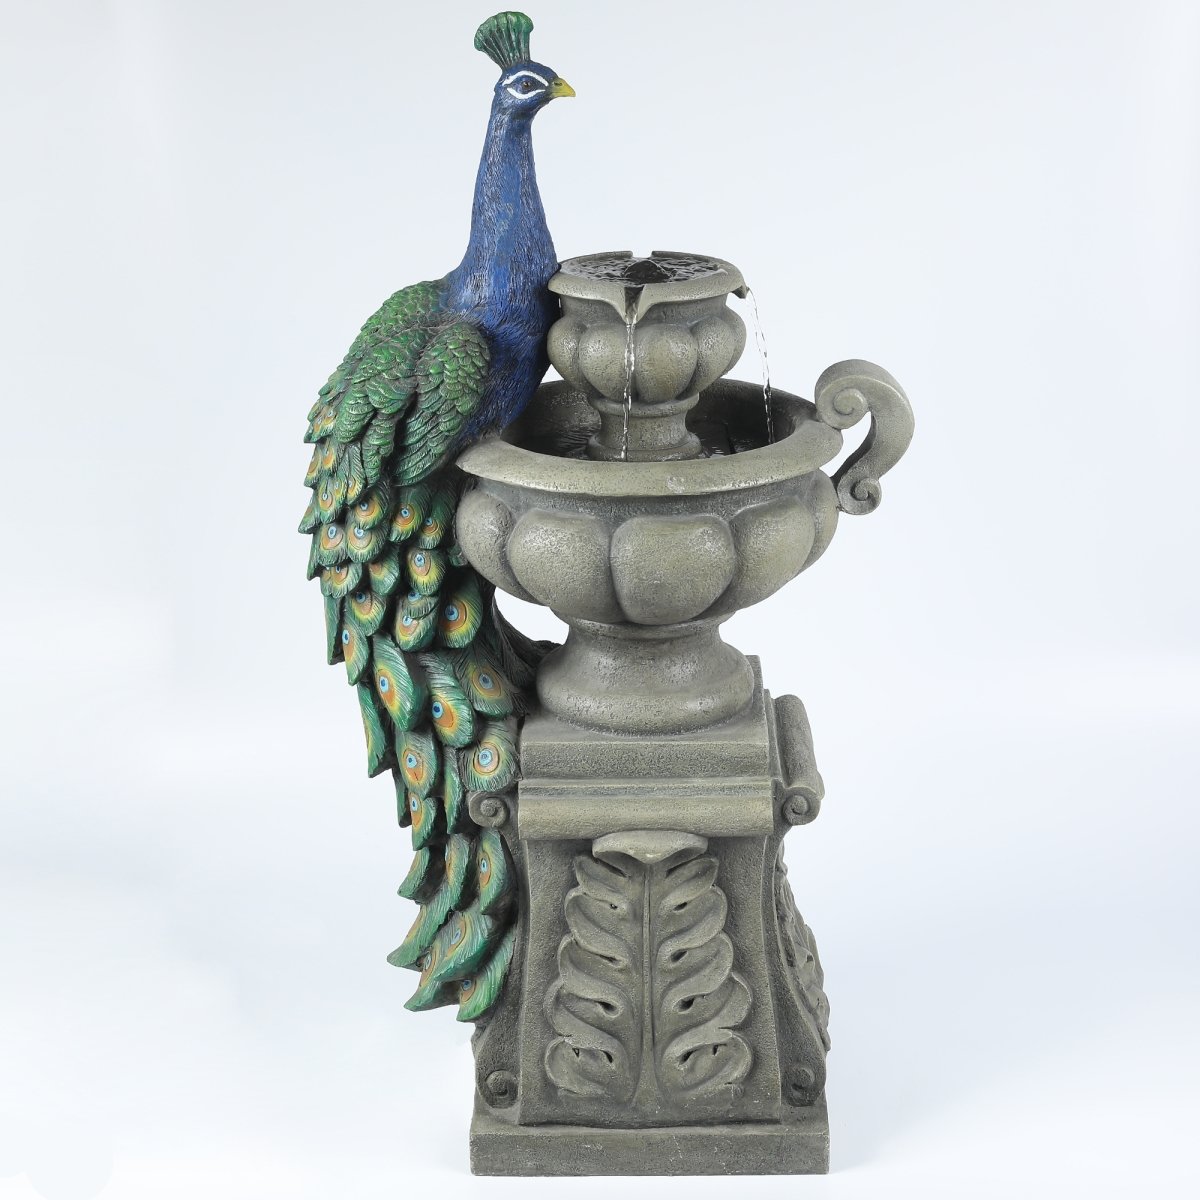 Whf723 Resin Roma Tiered Urns & Peacock Outdoor Patio Fountain